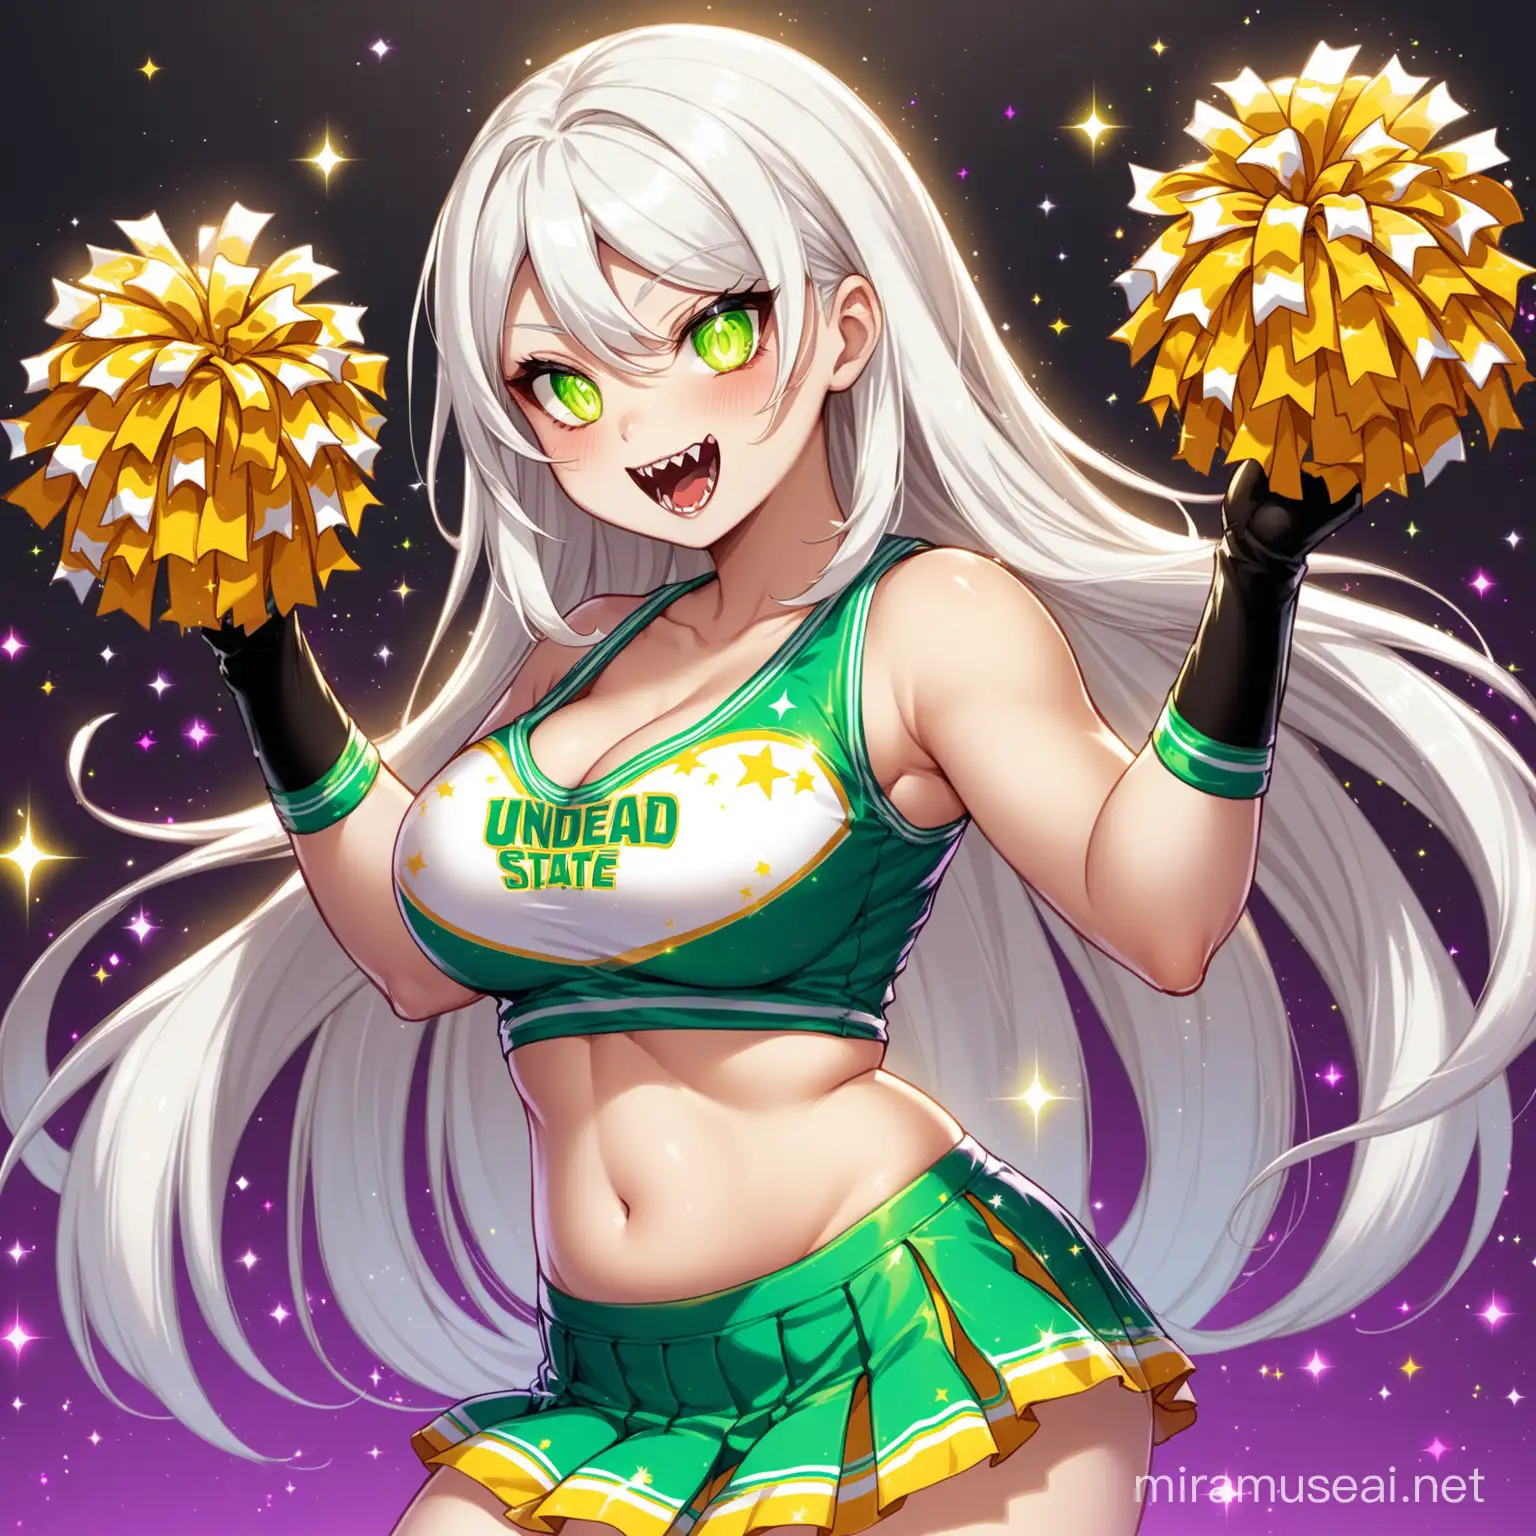 Cheerful Undead Cheerleader with Flowing White Hair